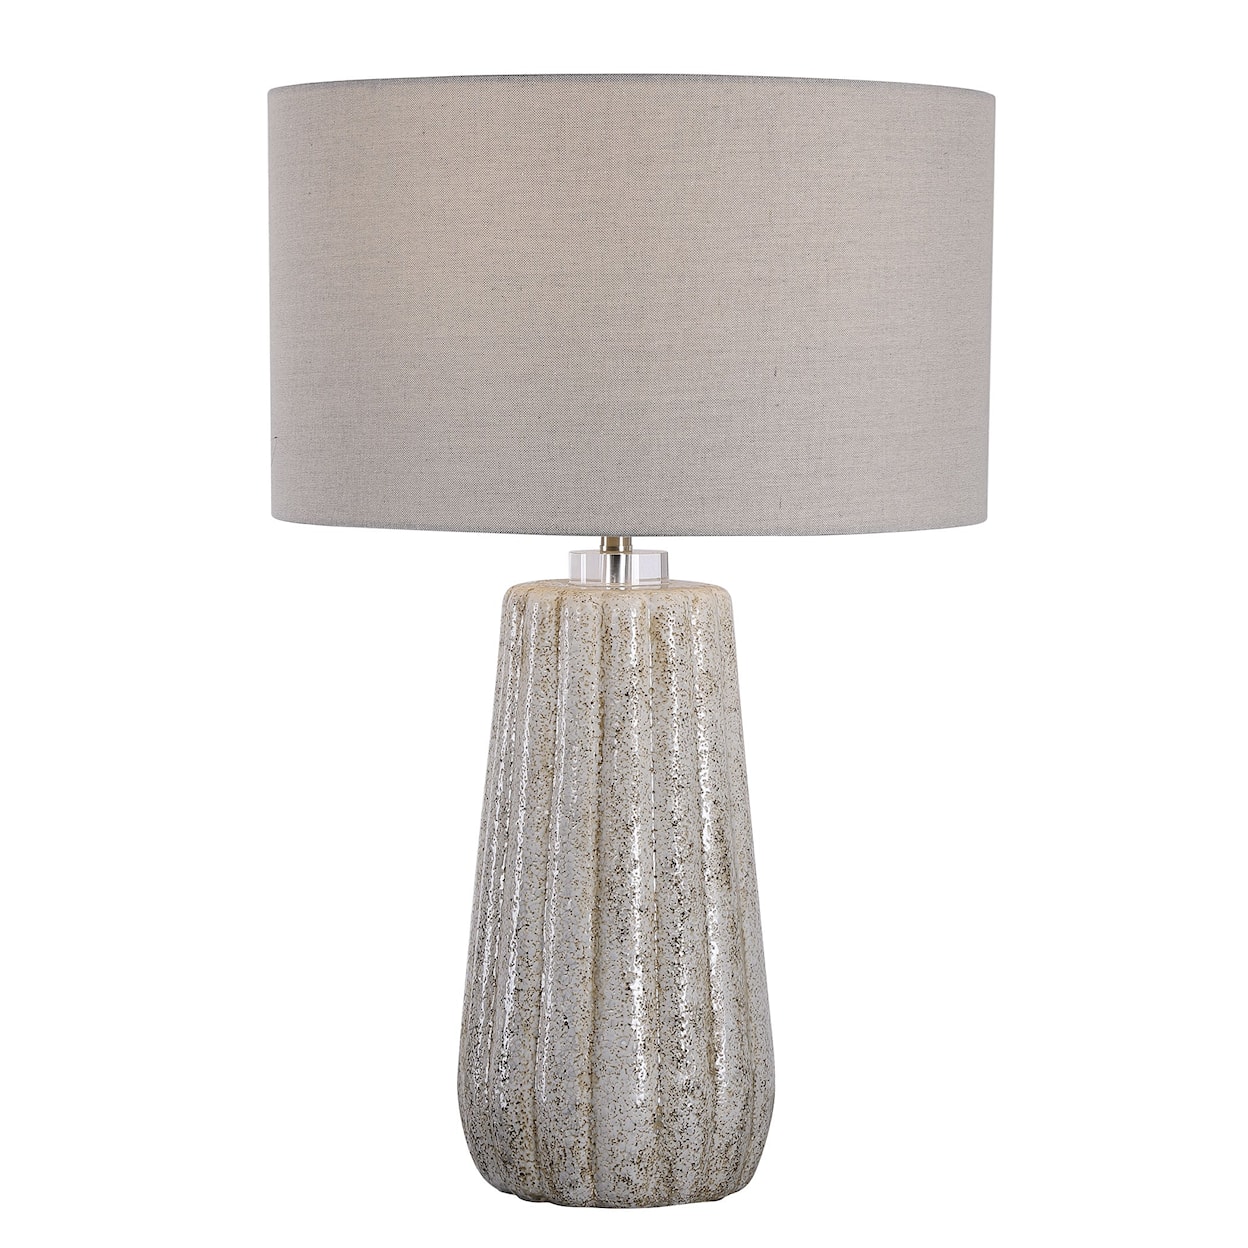 Uttermost Table Lamps Stone-Ivory Table Lamp